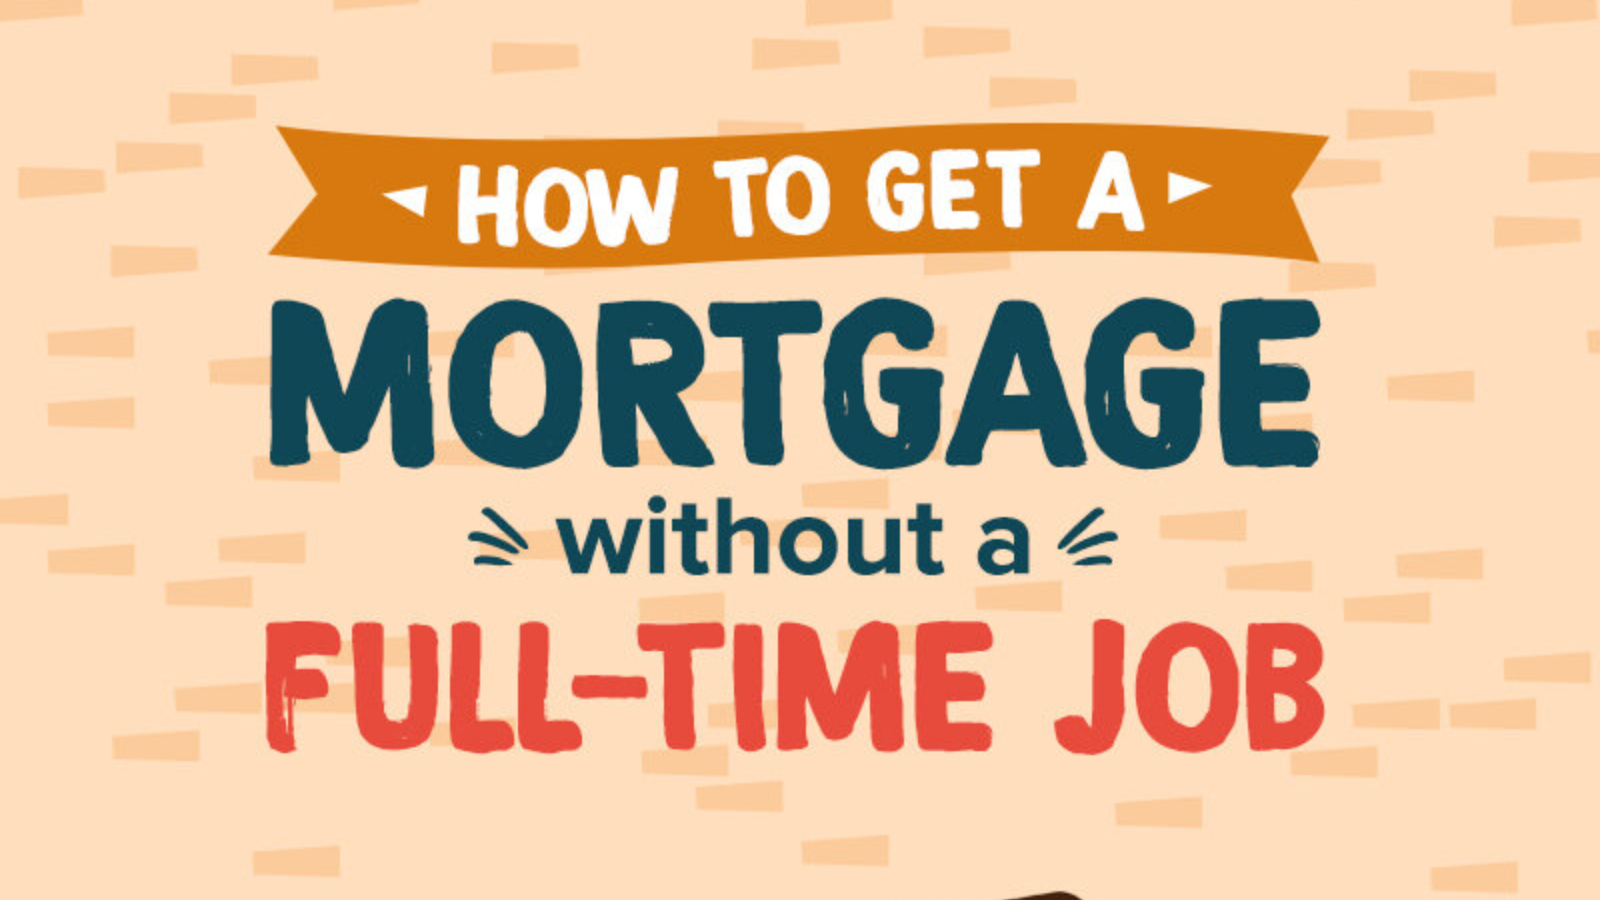 7 Secrets To Getting A Mortgage Without A Full-Time Job